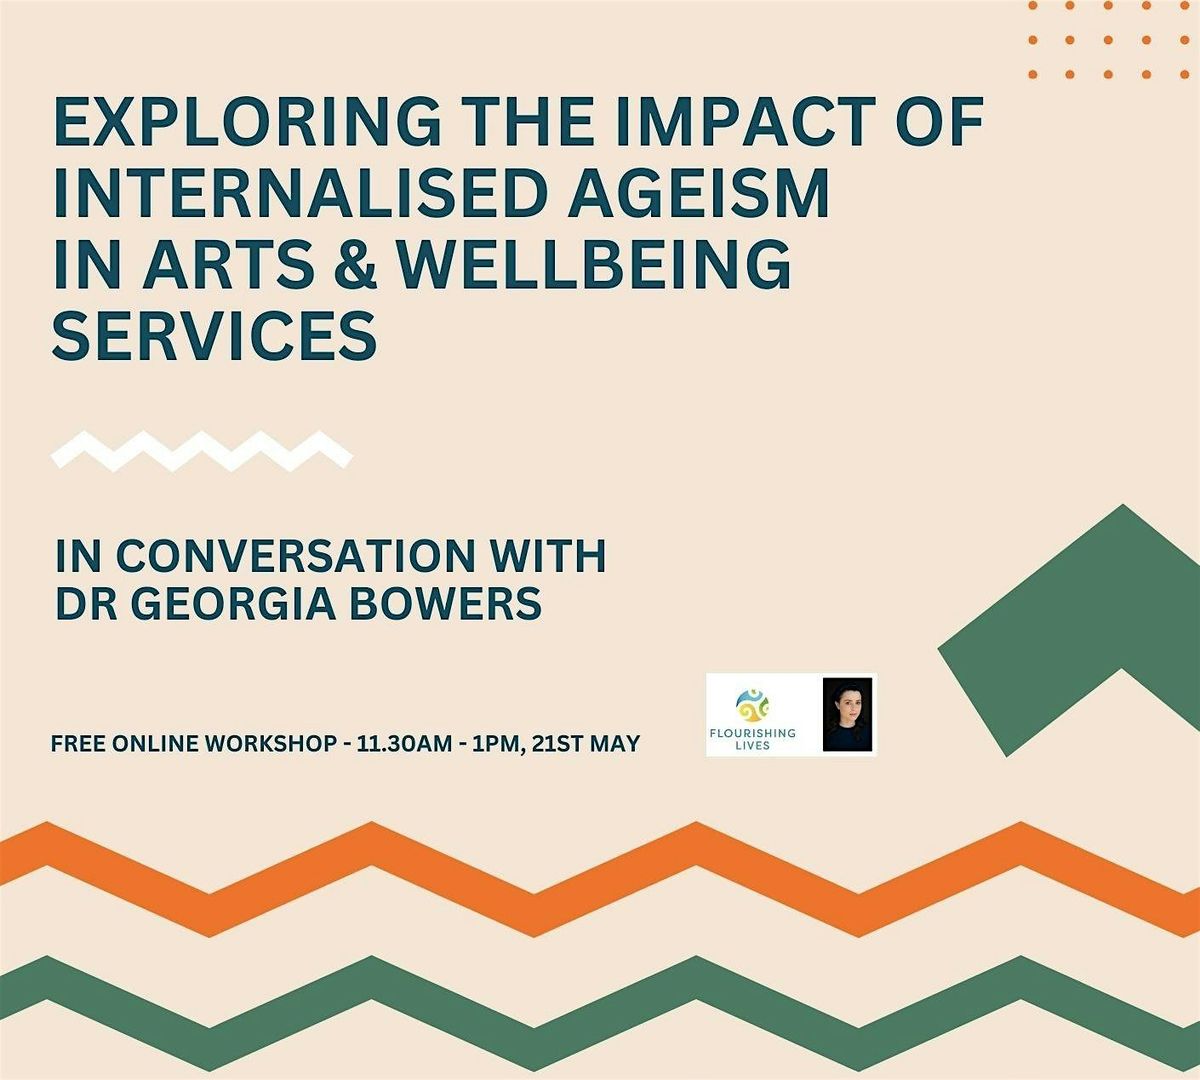 Exploring the Impact of Internalised Ageism in Arts & Wellbeing Services